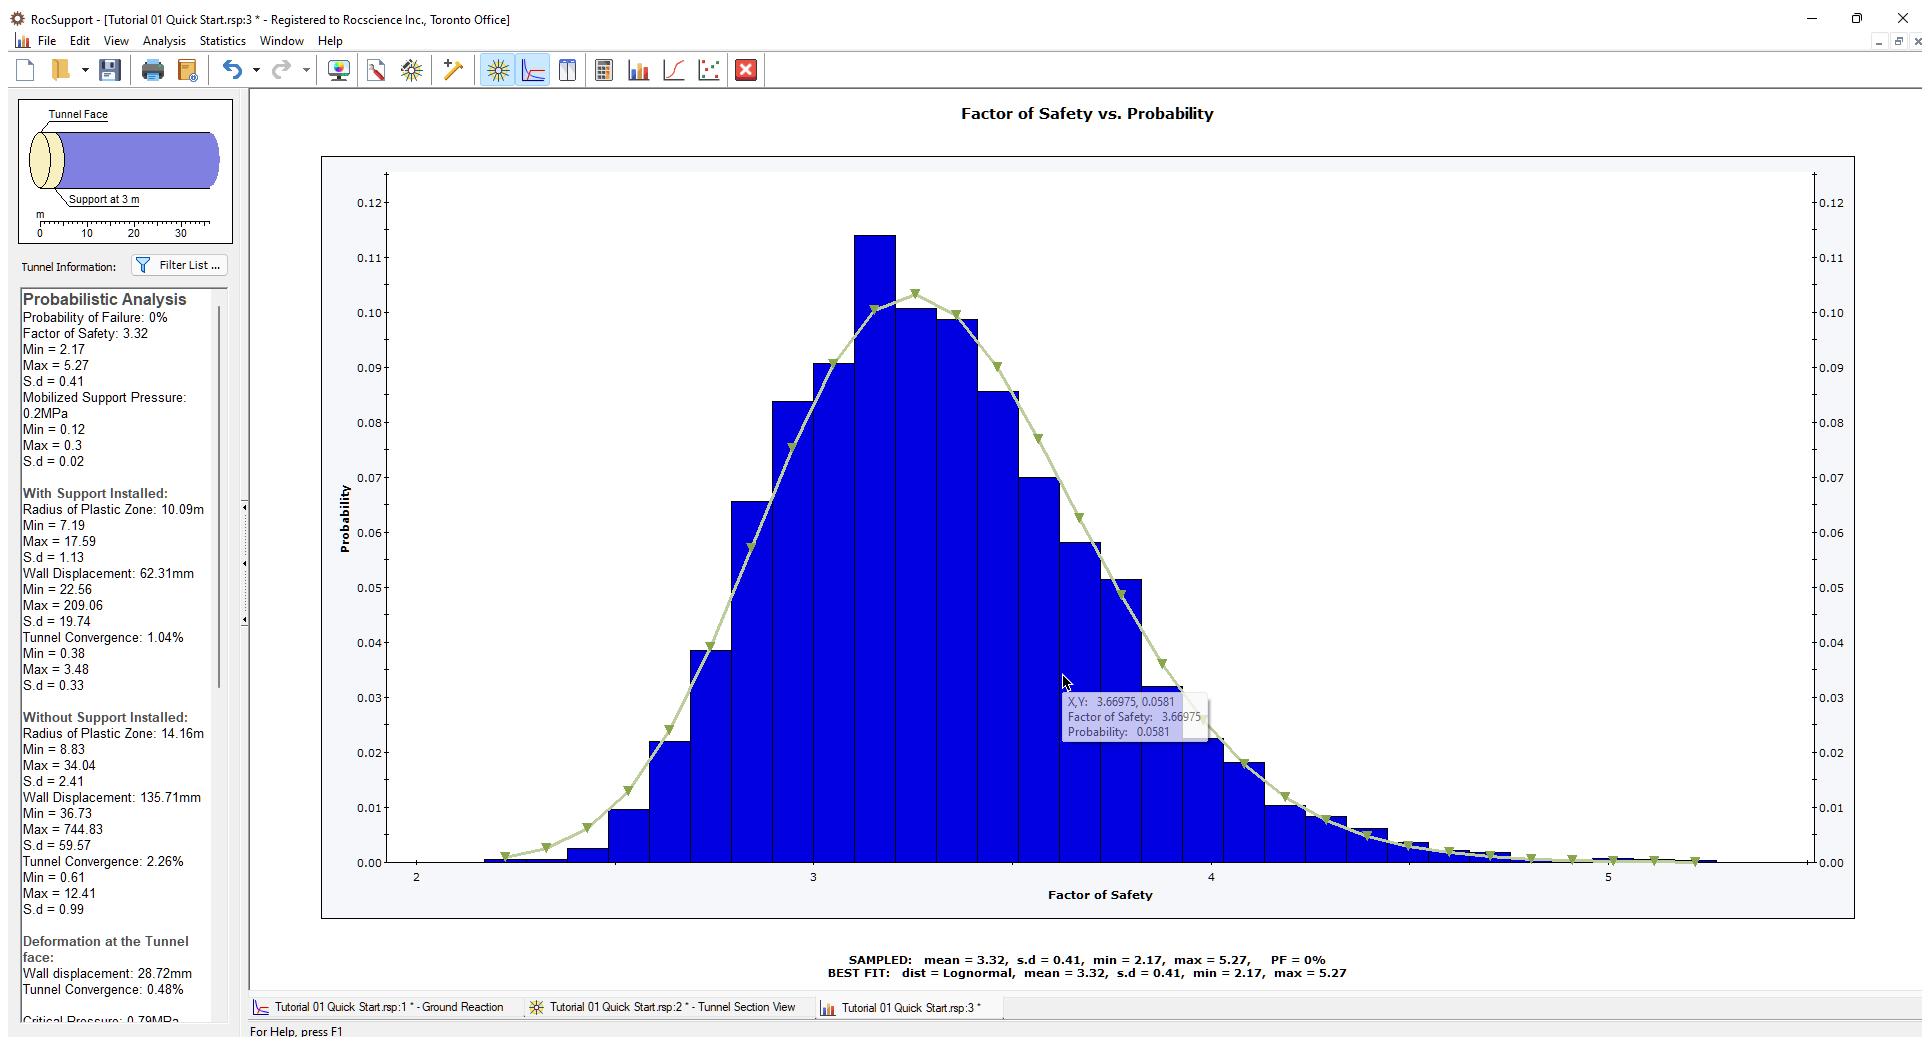 Factor of Safety Histogram